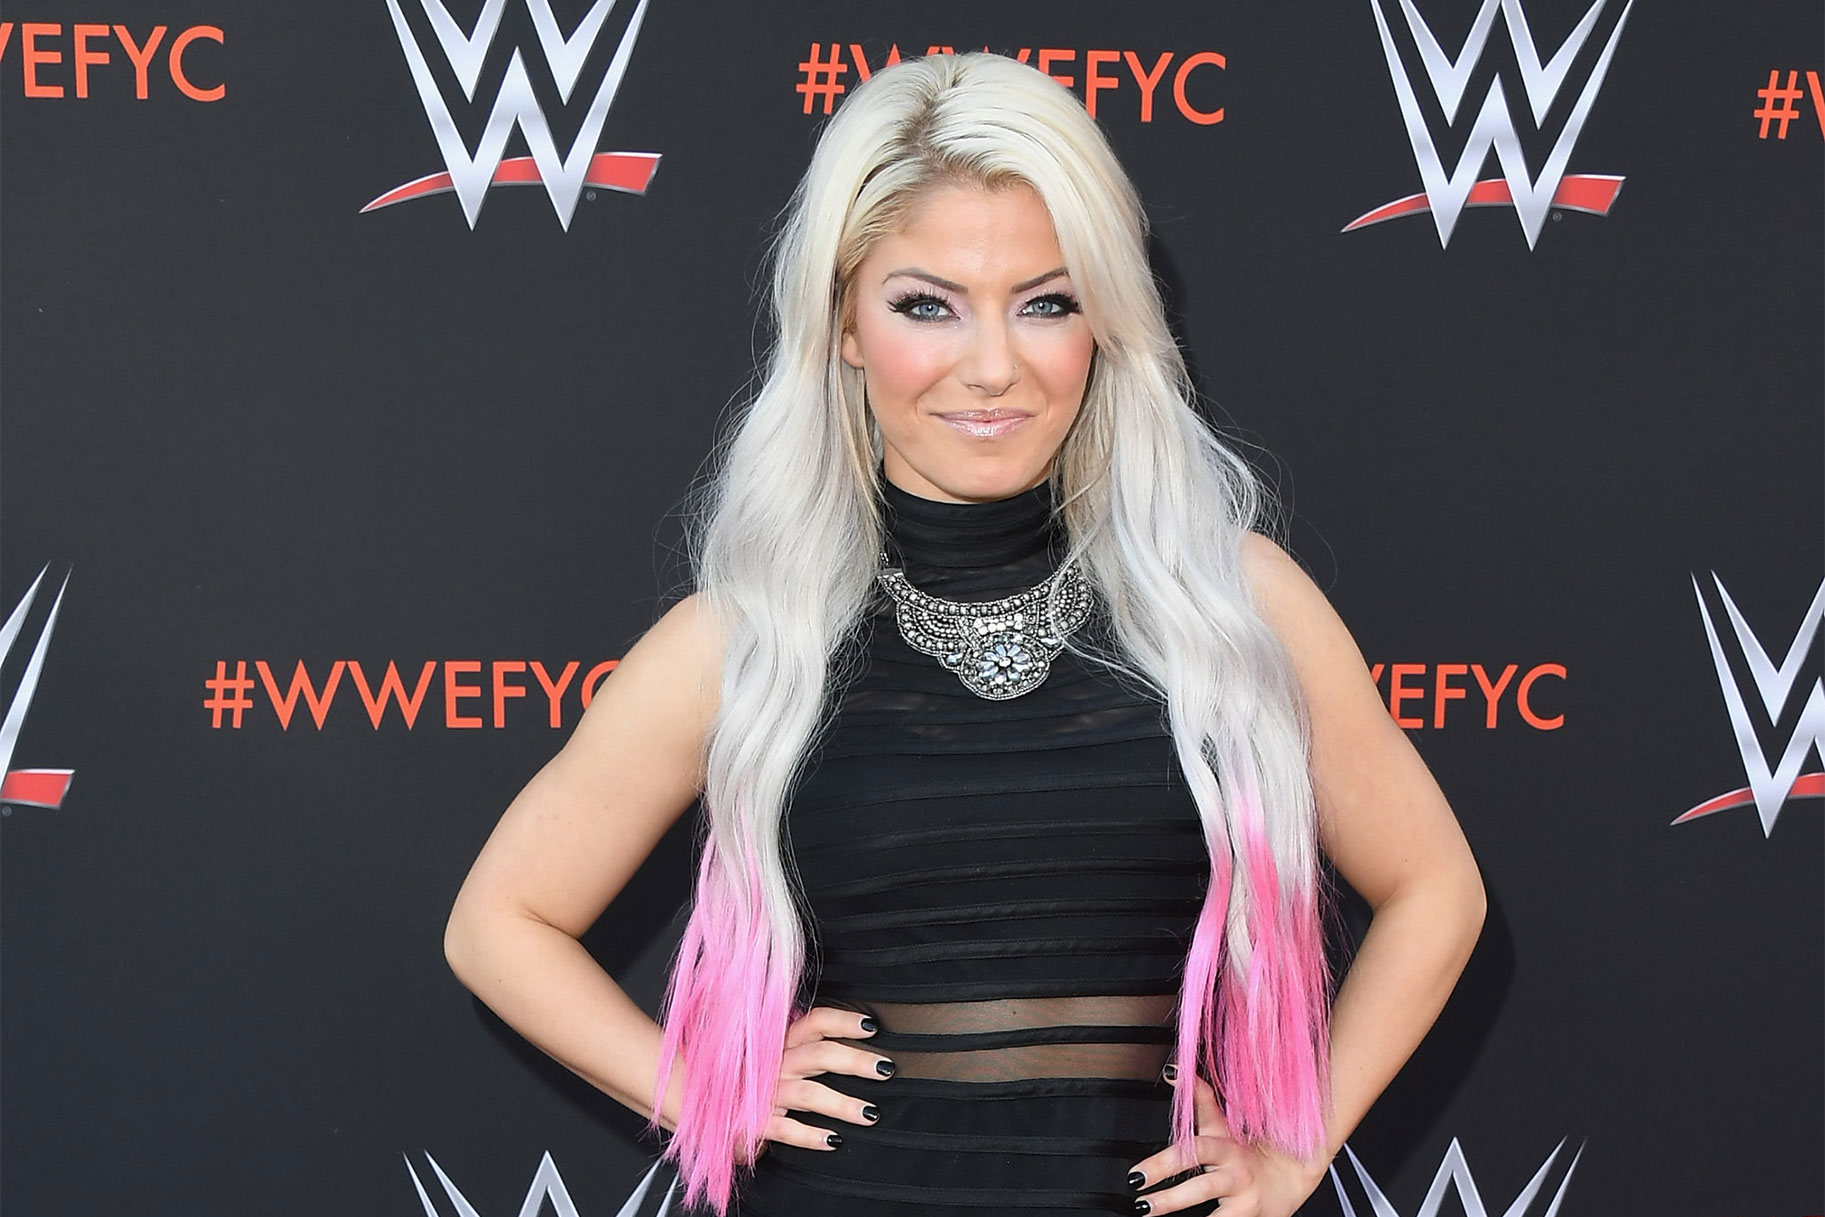 Alexa Bliss poses on the red carpet of a WWE event